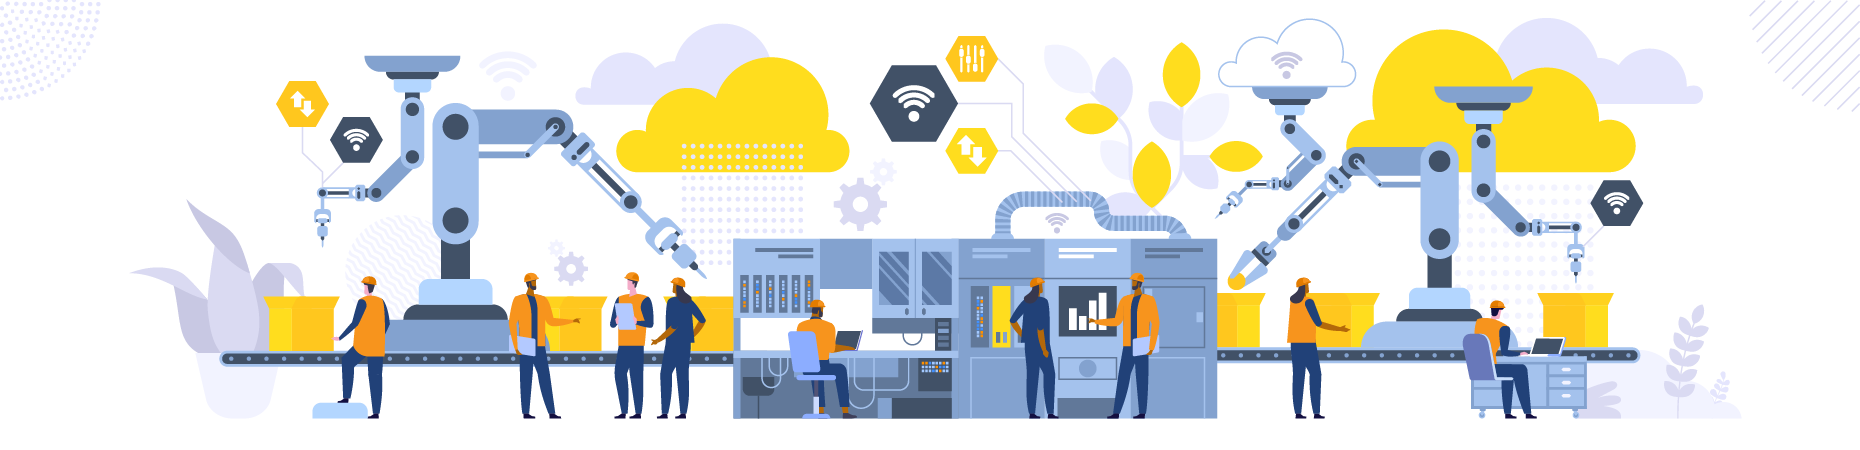 Male and female worker working in smart factory  Illustration